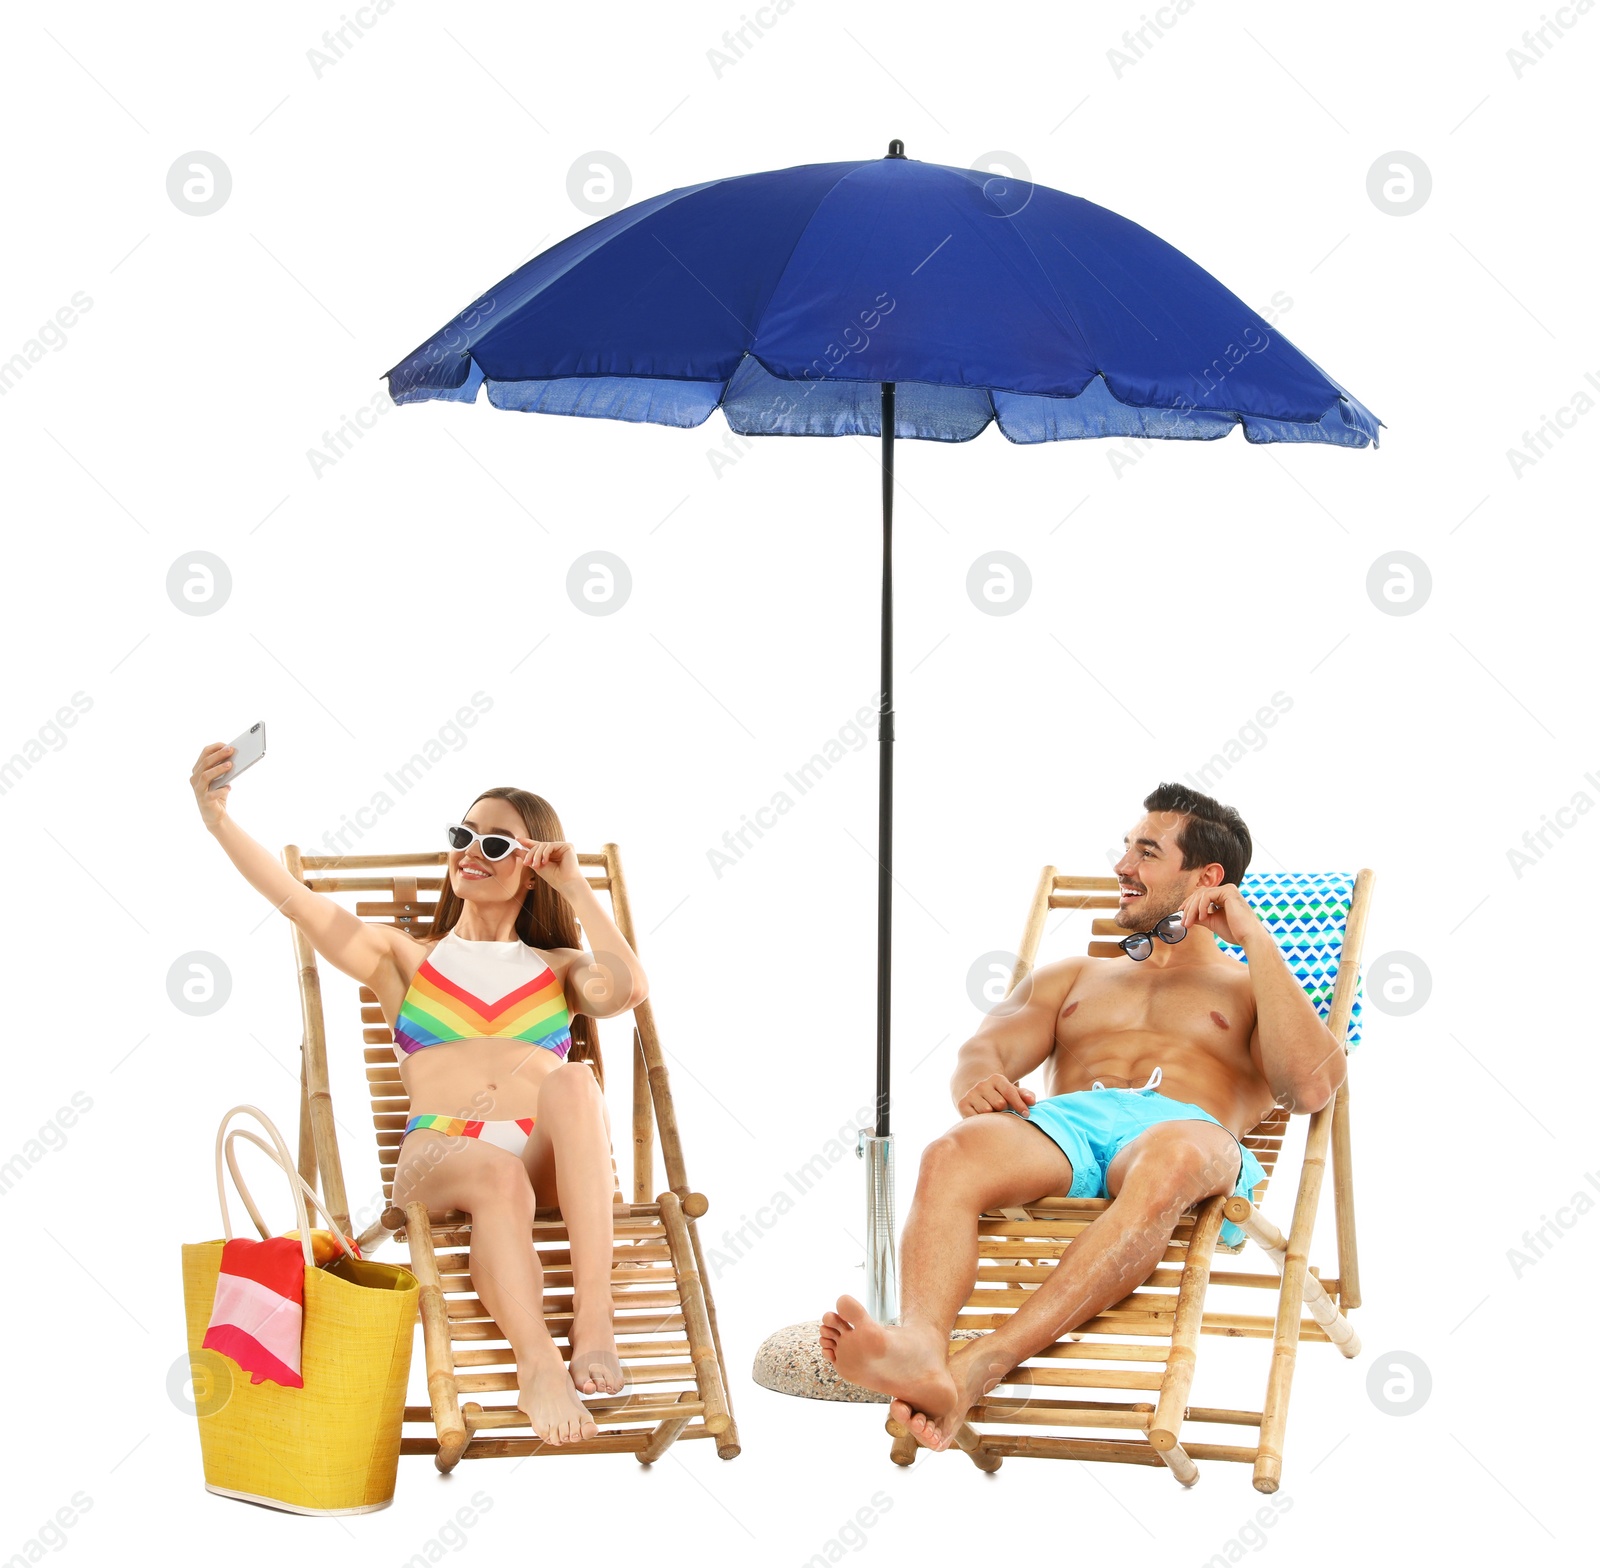 Photo of Young couple taking selfie on sun loungers under umbrella against white background. Beach accessories